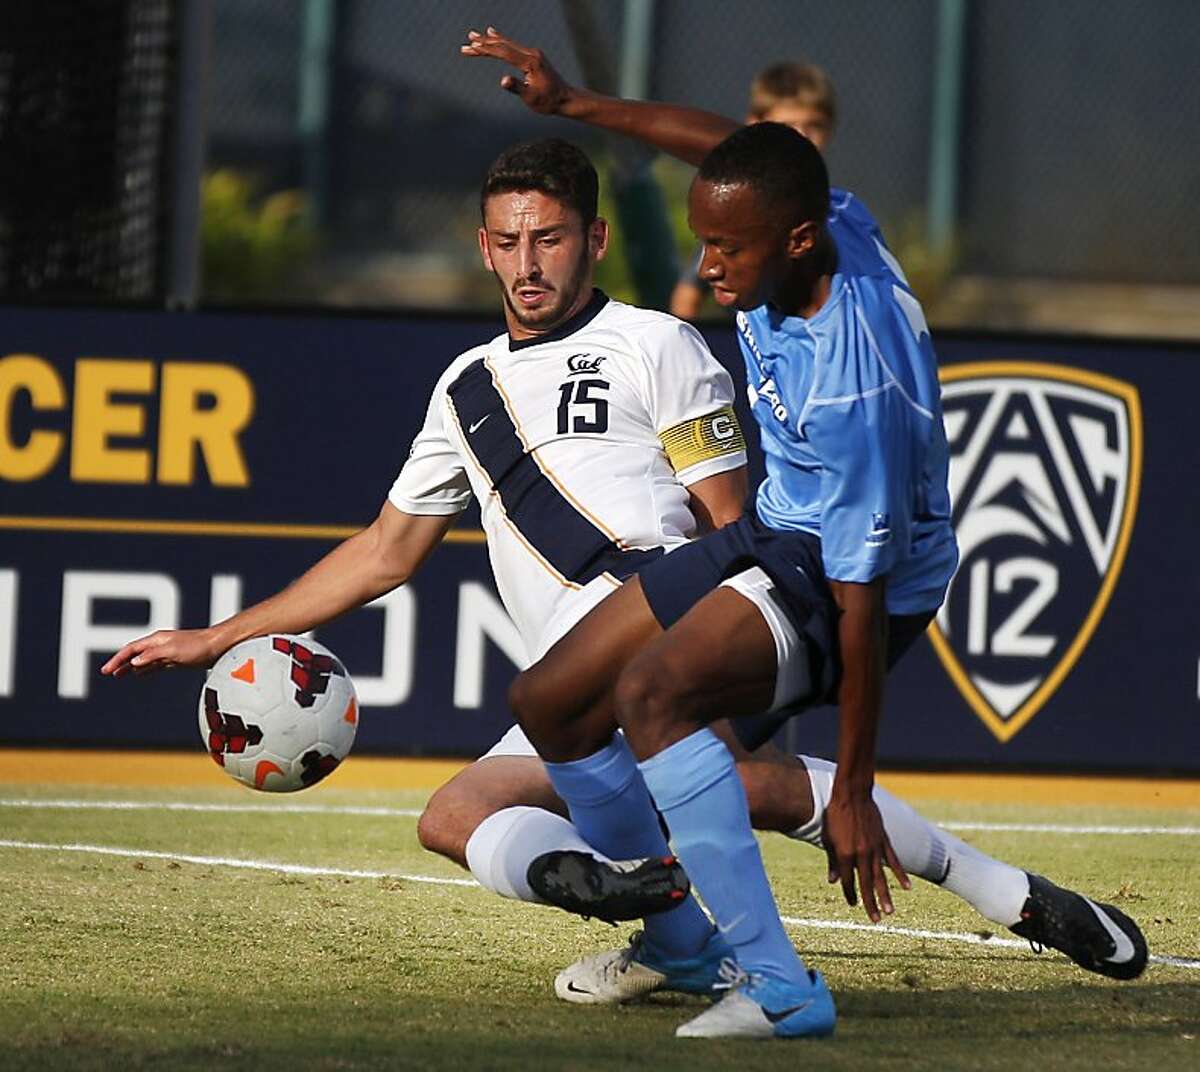 Cal's Steve Birnbaum, left, slide tackles San Diego's Blake Milton while competing in a match against University of San Diego October 25, 2013 at Goldman Field at Edwards Stadium in Berkeley, Calif. San Diego won the game.